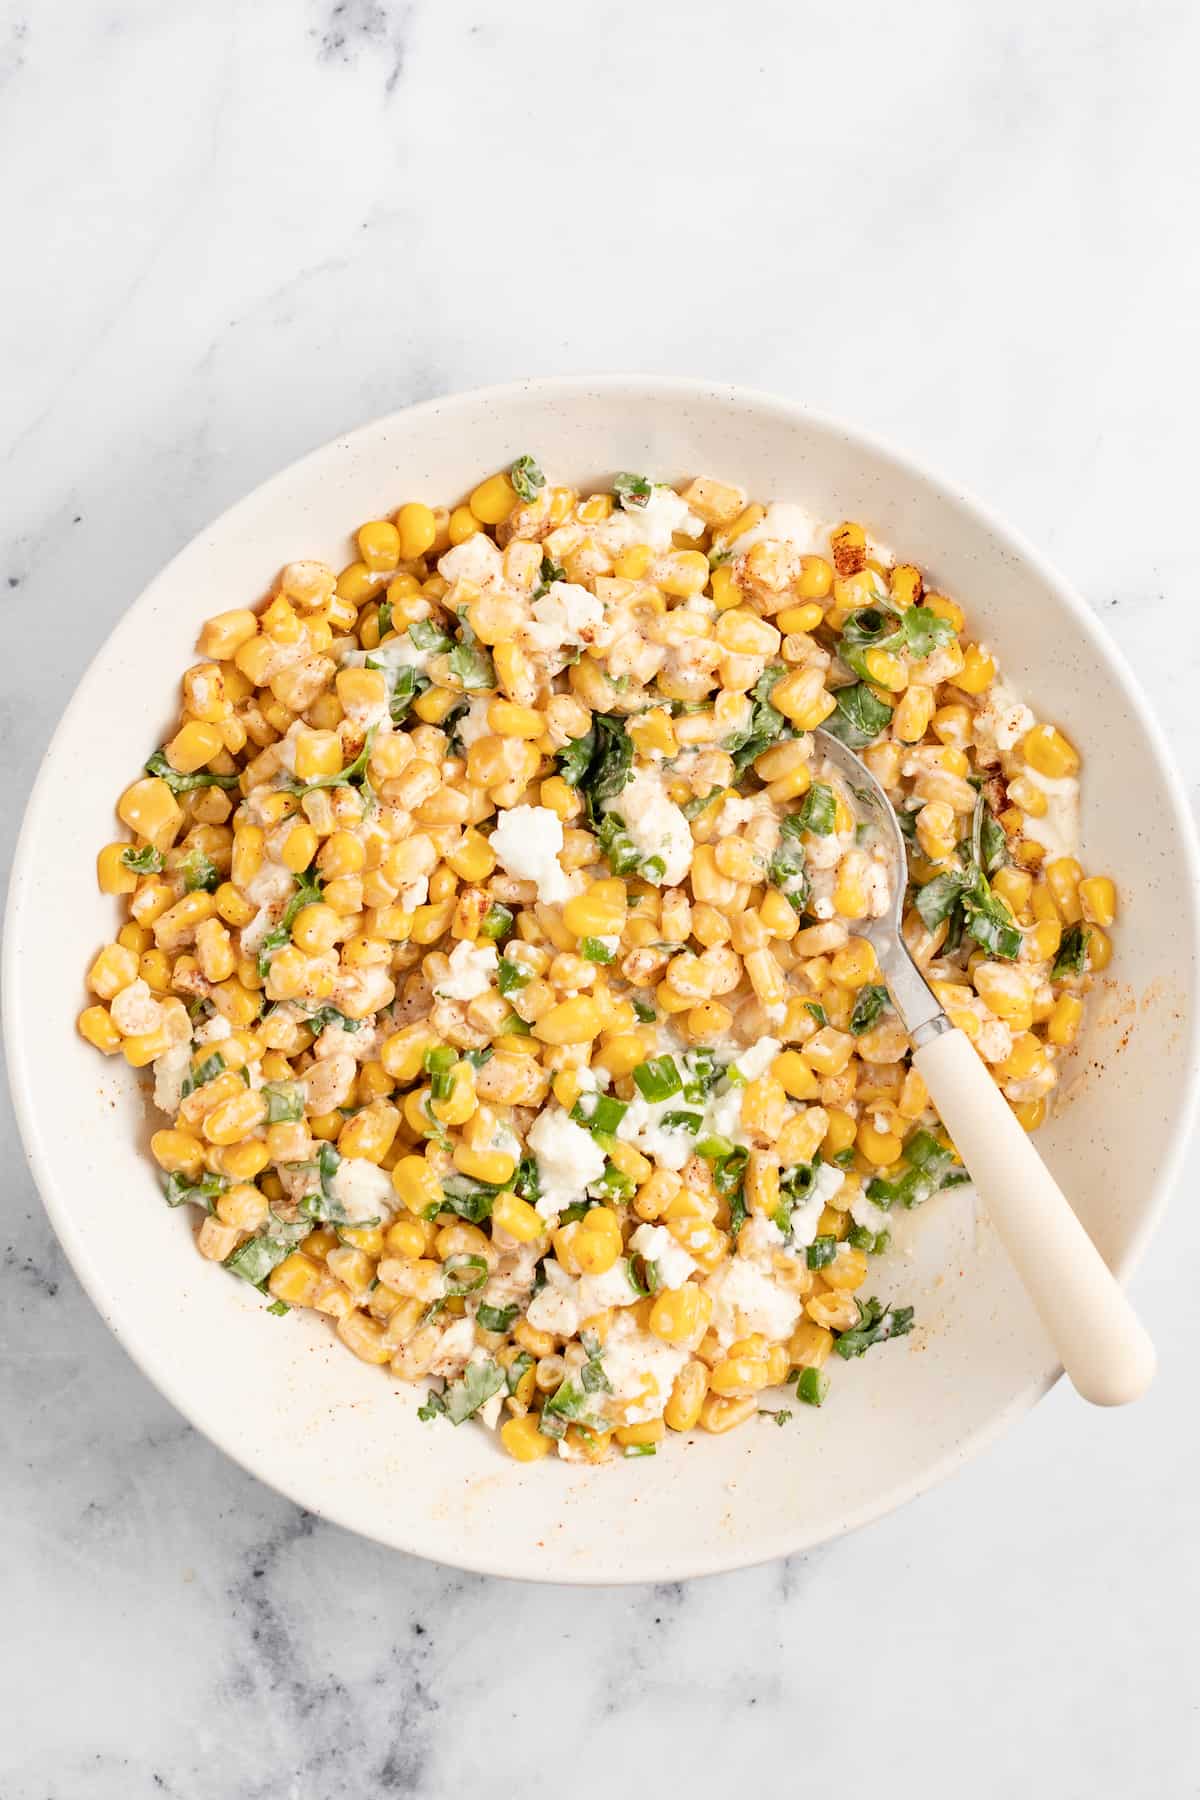 Mexican Street Corn Salad in a bowl which is made of corn, herbs, ،es, and a creamy dressing